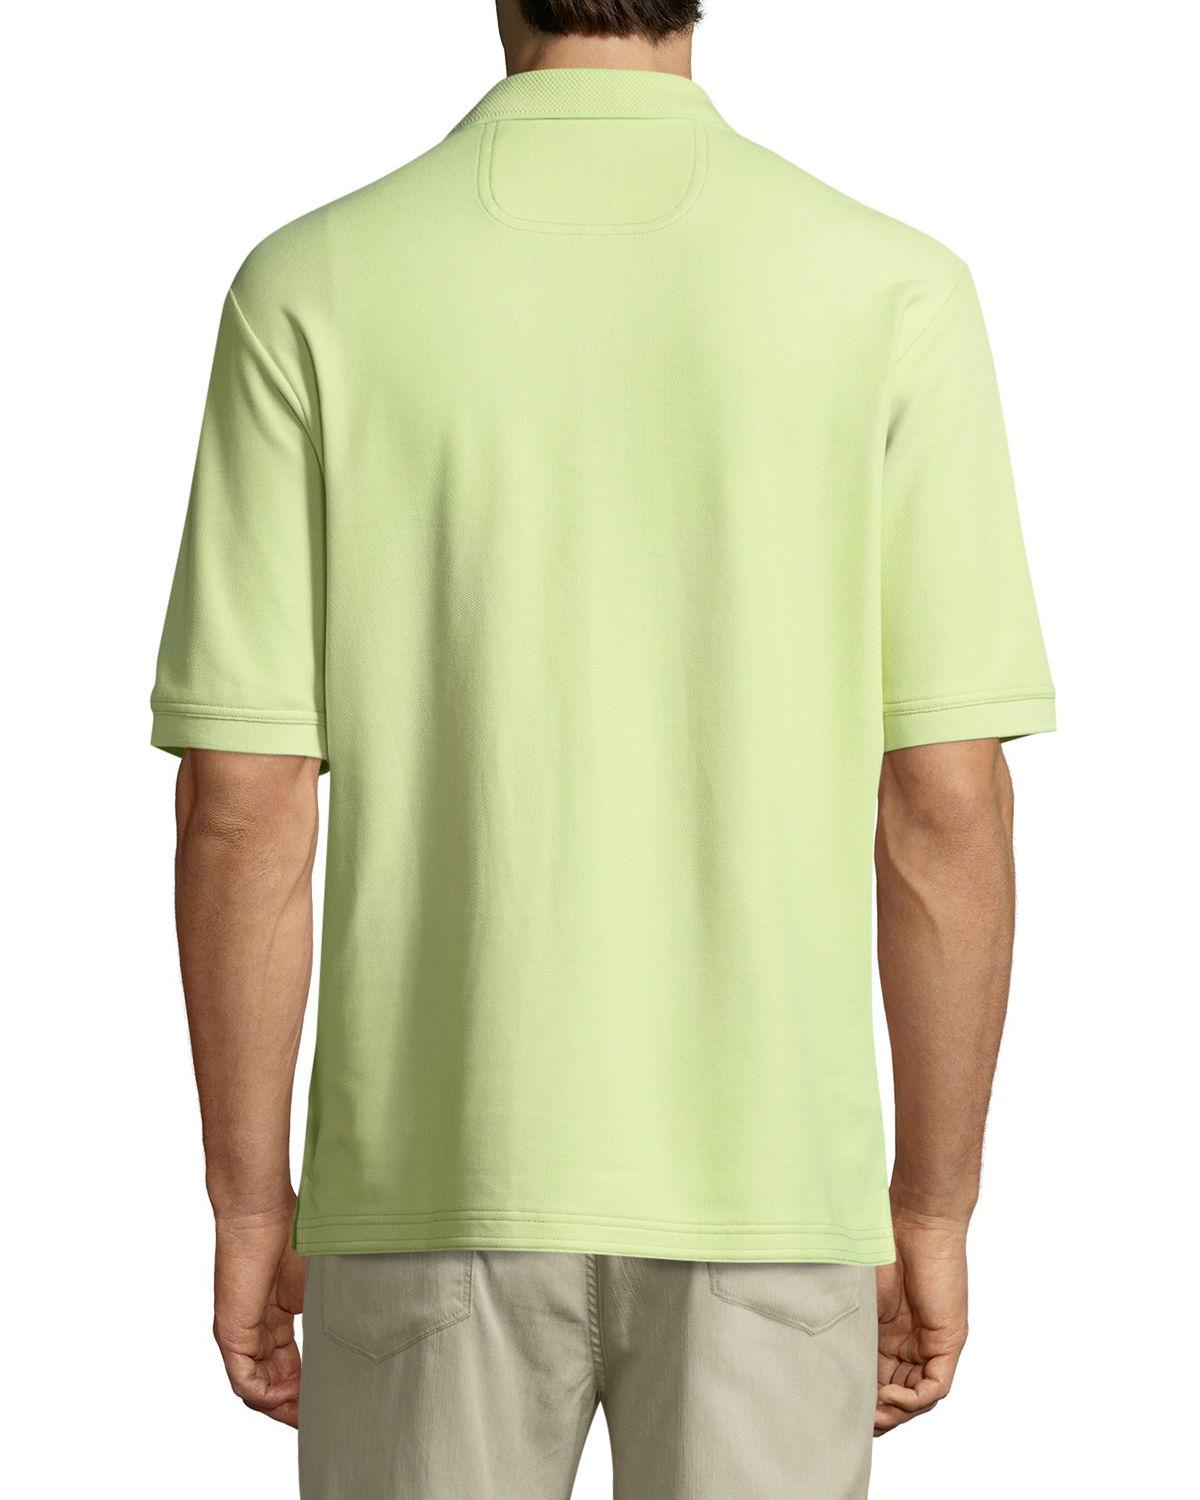 Lyst - Tommy Bahama Polo Shirt With Sailfish Embroidery in Green for Men